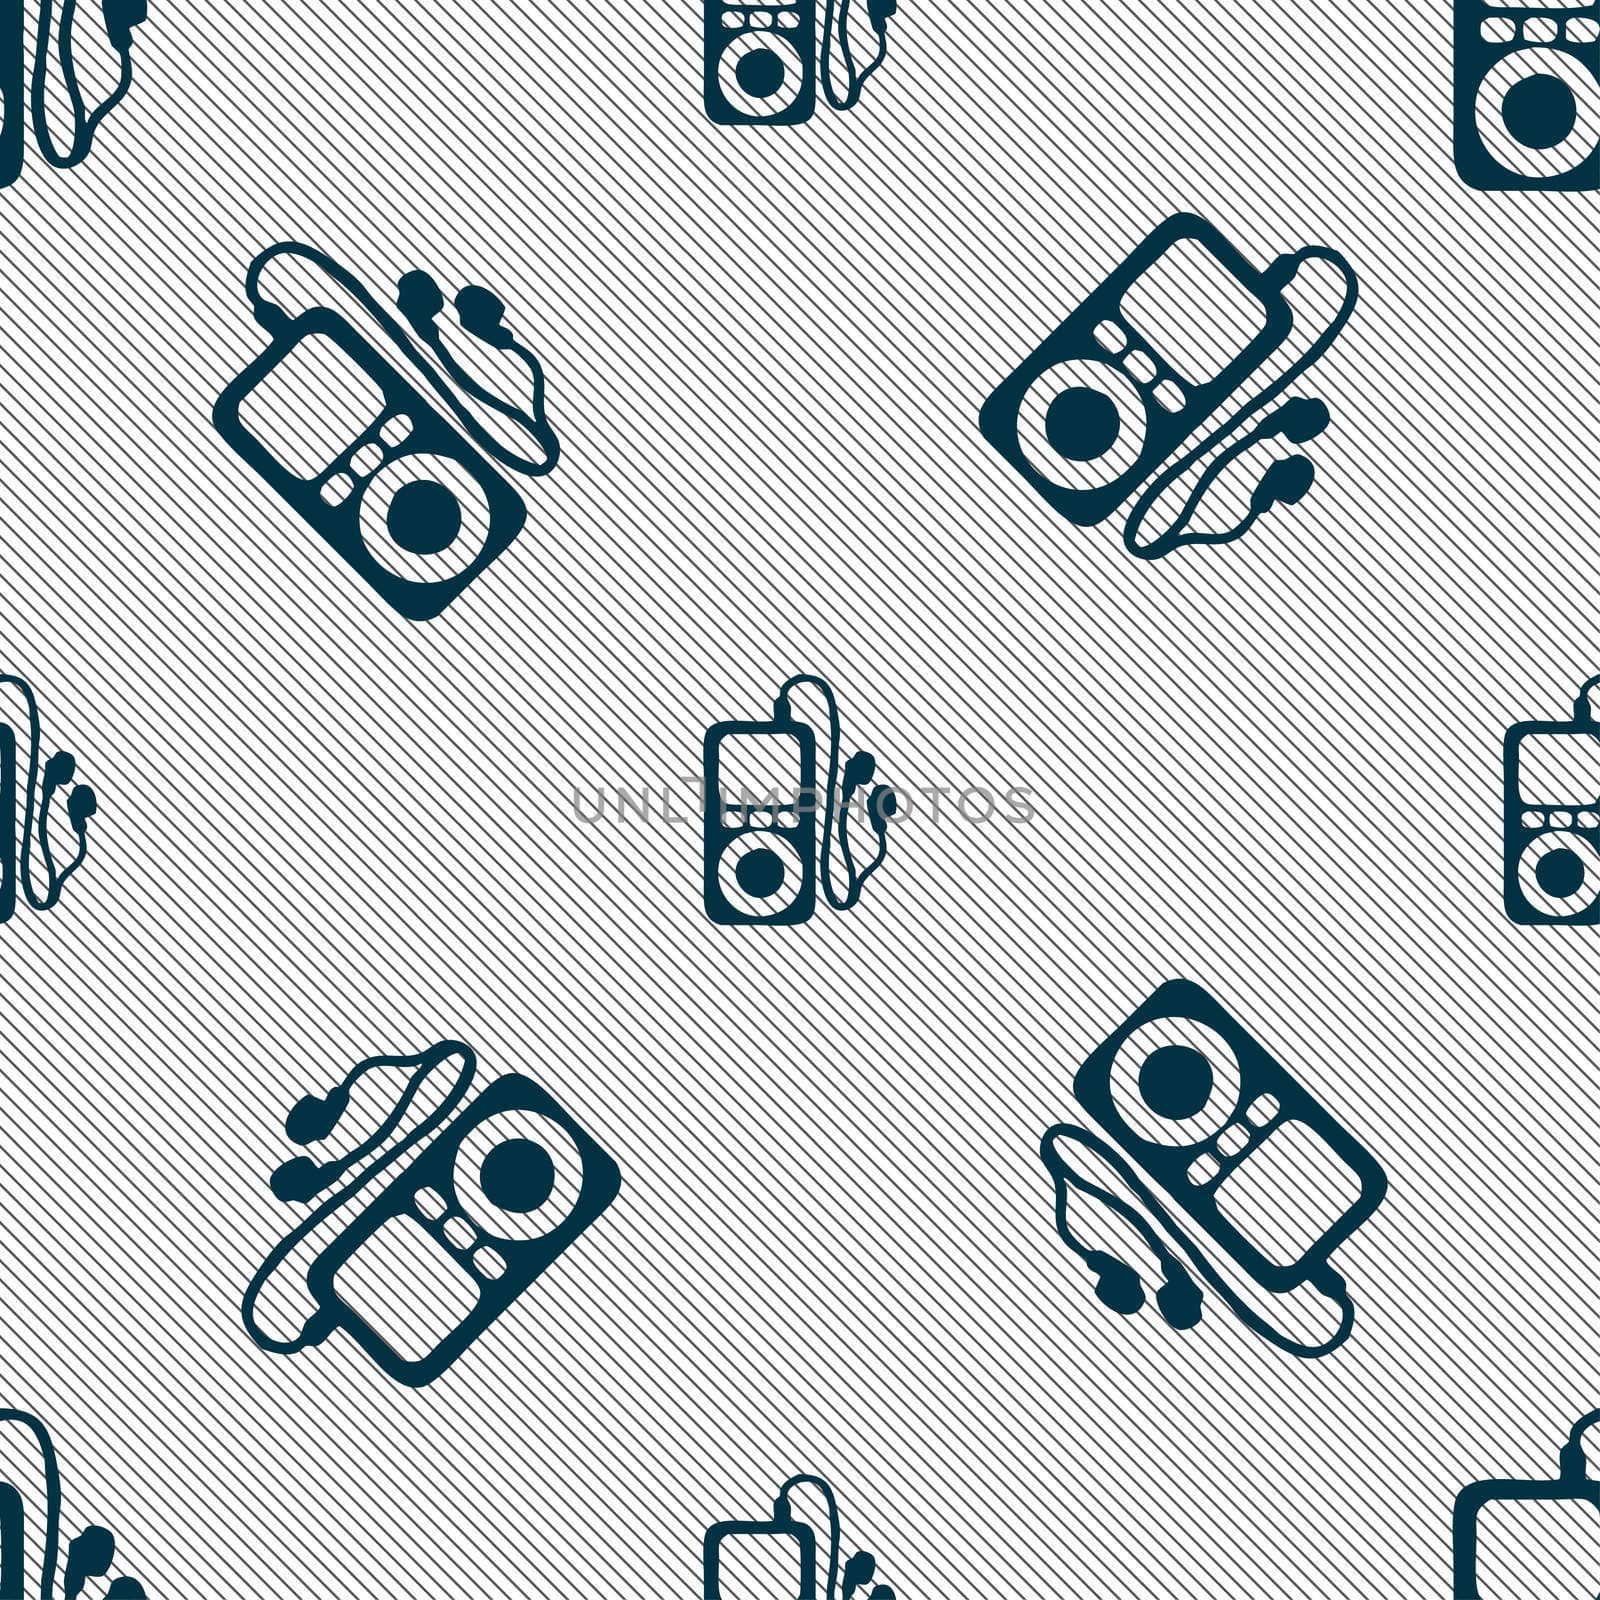 MP3 player, headphones, music icon sign. Seamless pattern with geometric texture. illustration